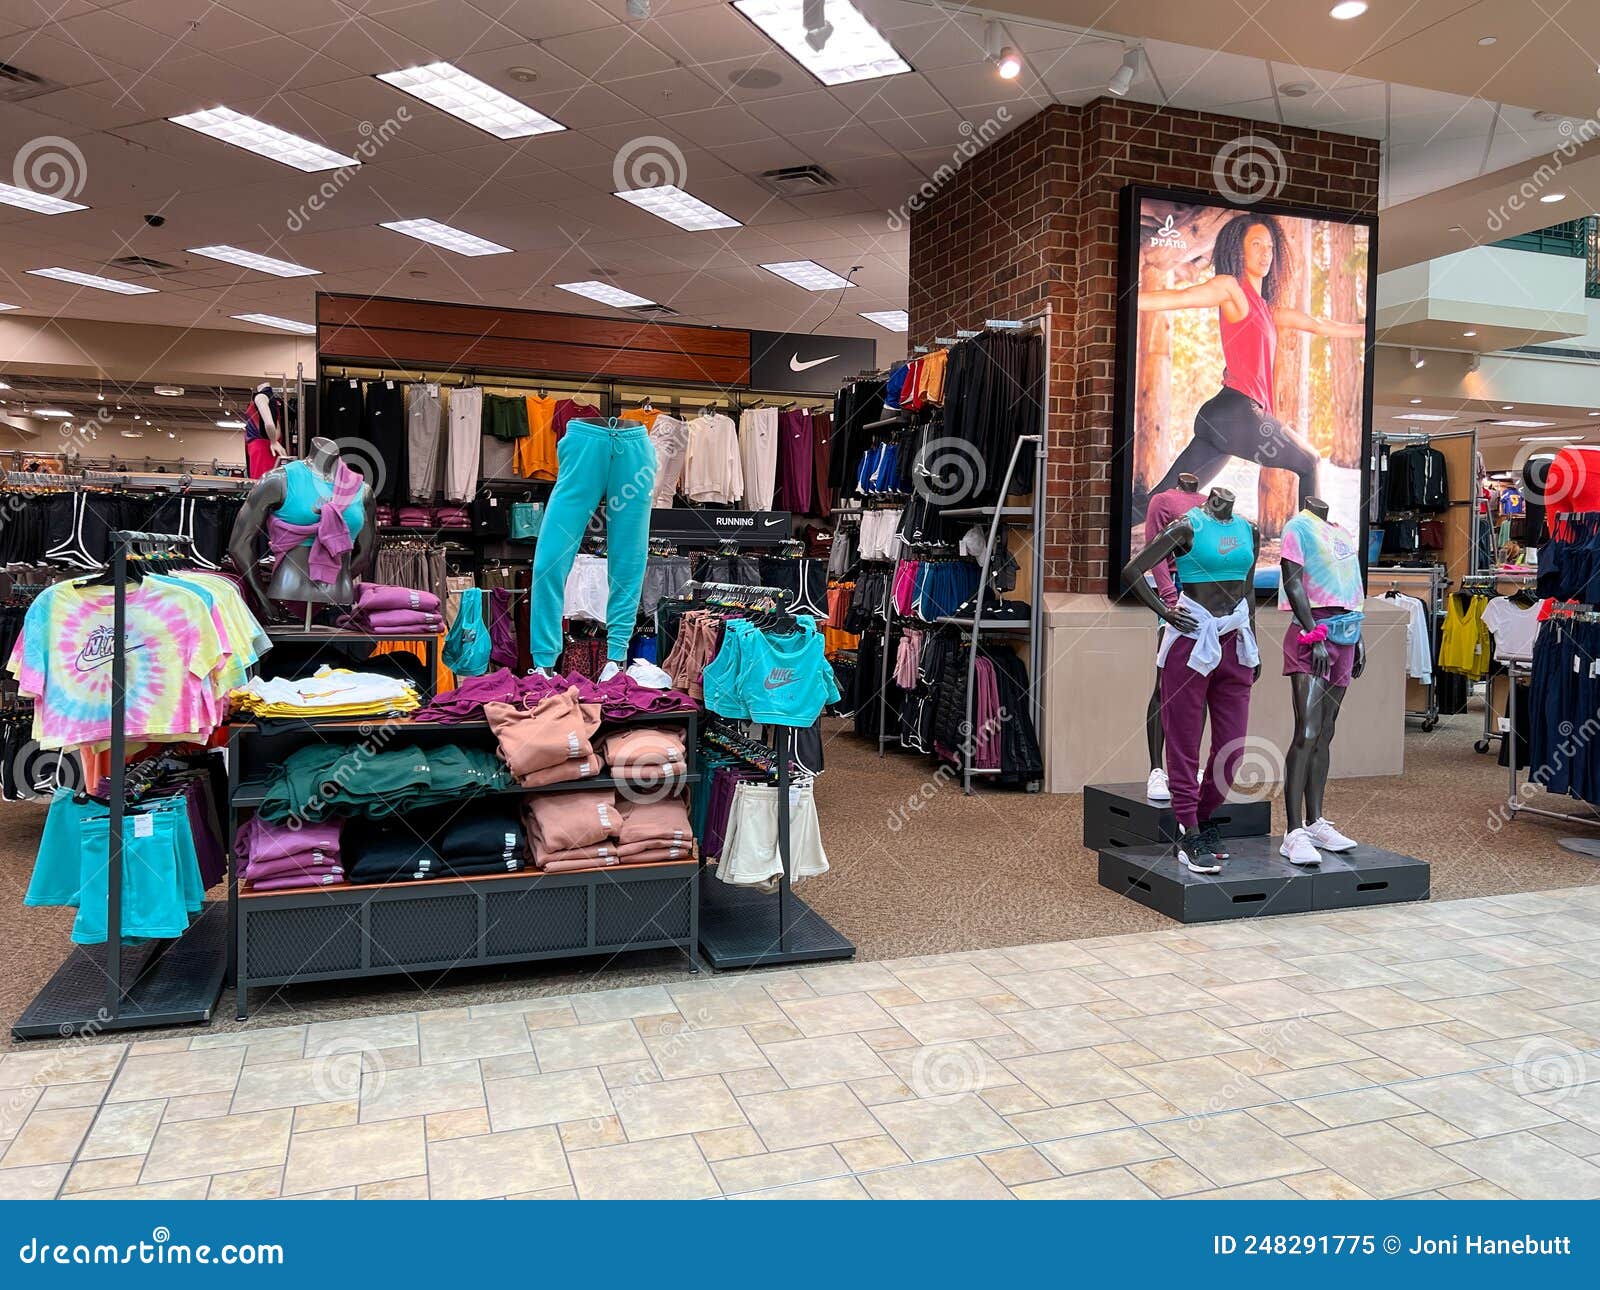 https://thumbs.dreamstime.com/z/springfield-il-usa-may-panning-down-display-womens-nike-clothing-sale-scheels-sporting-goods-store-248291775.jpg